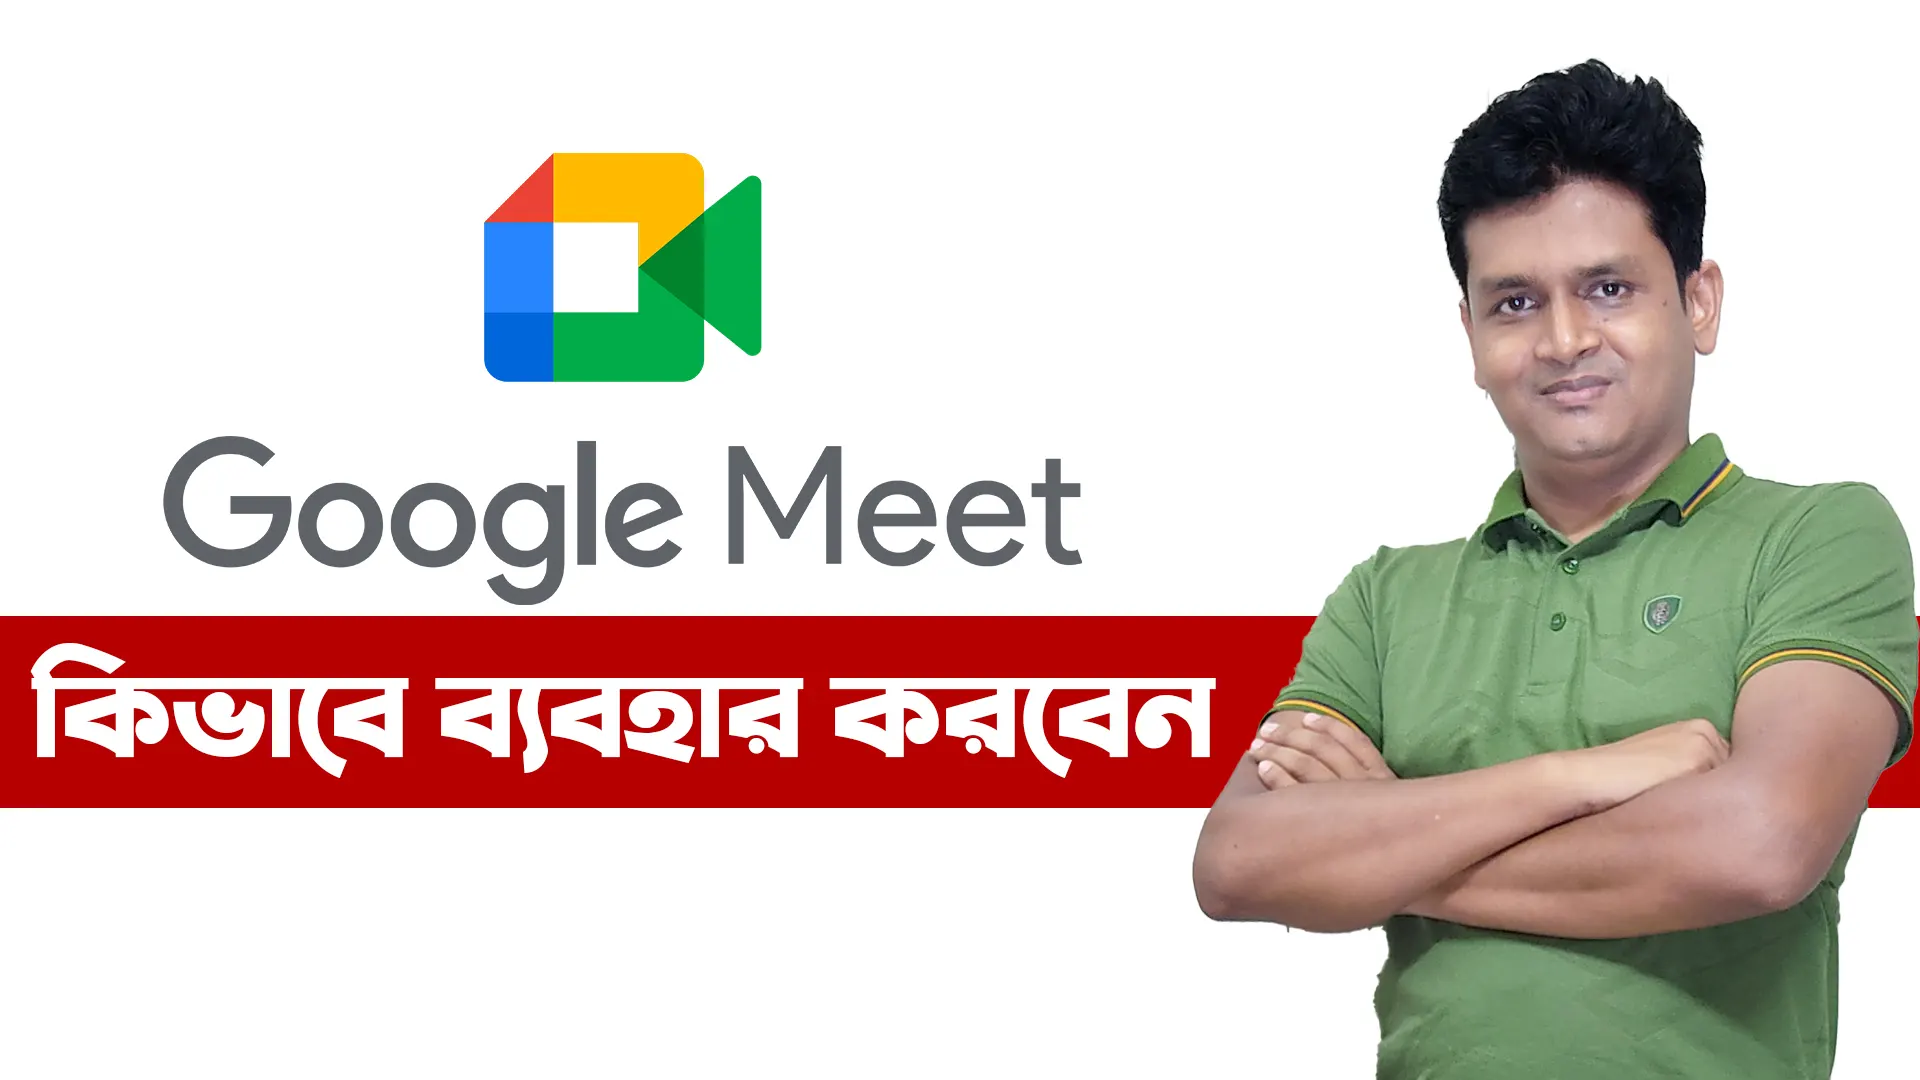 How To Use Google Meet on Computer and Mobile Without Install Software